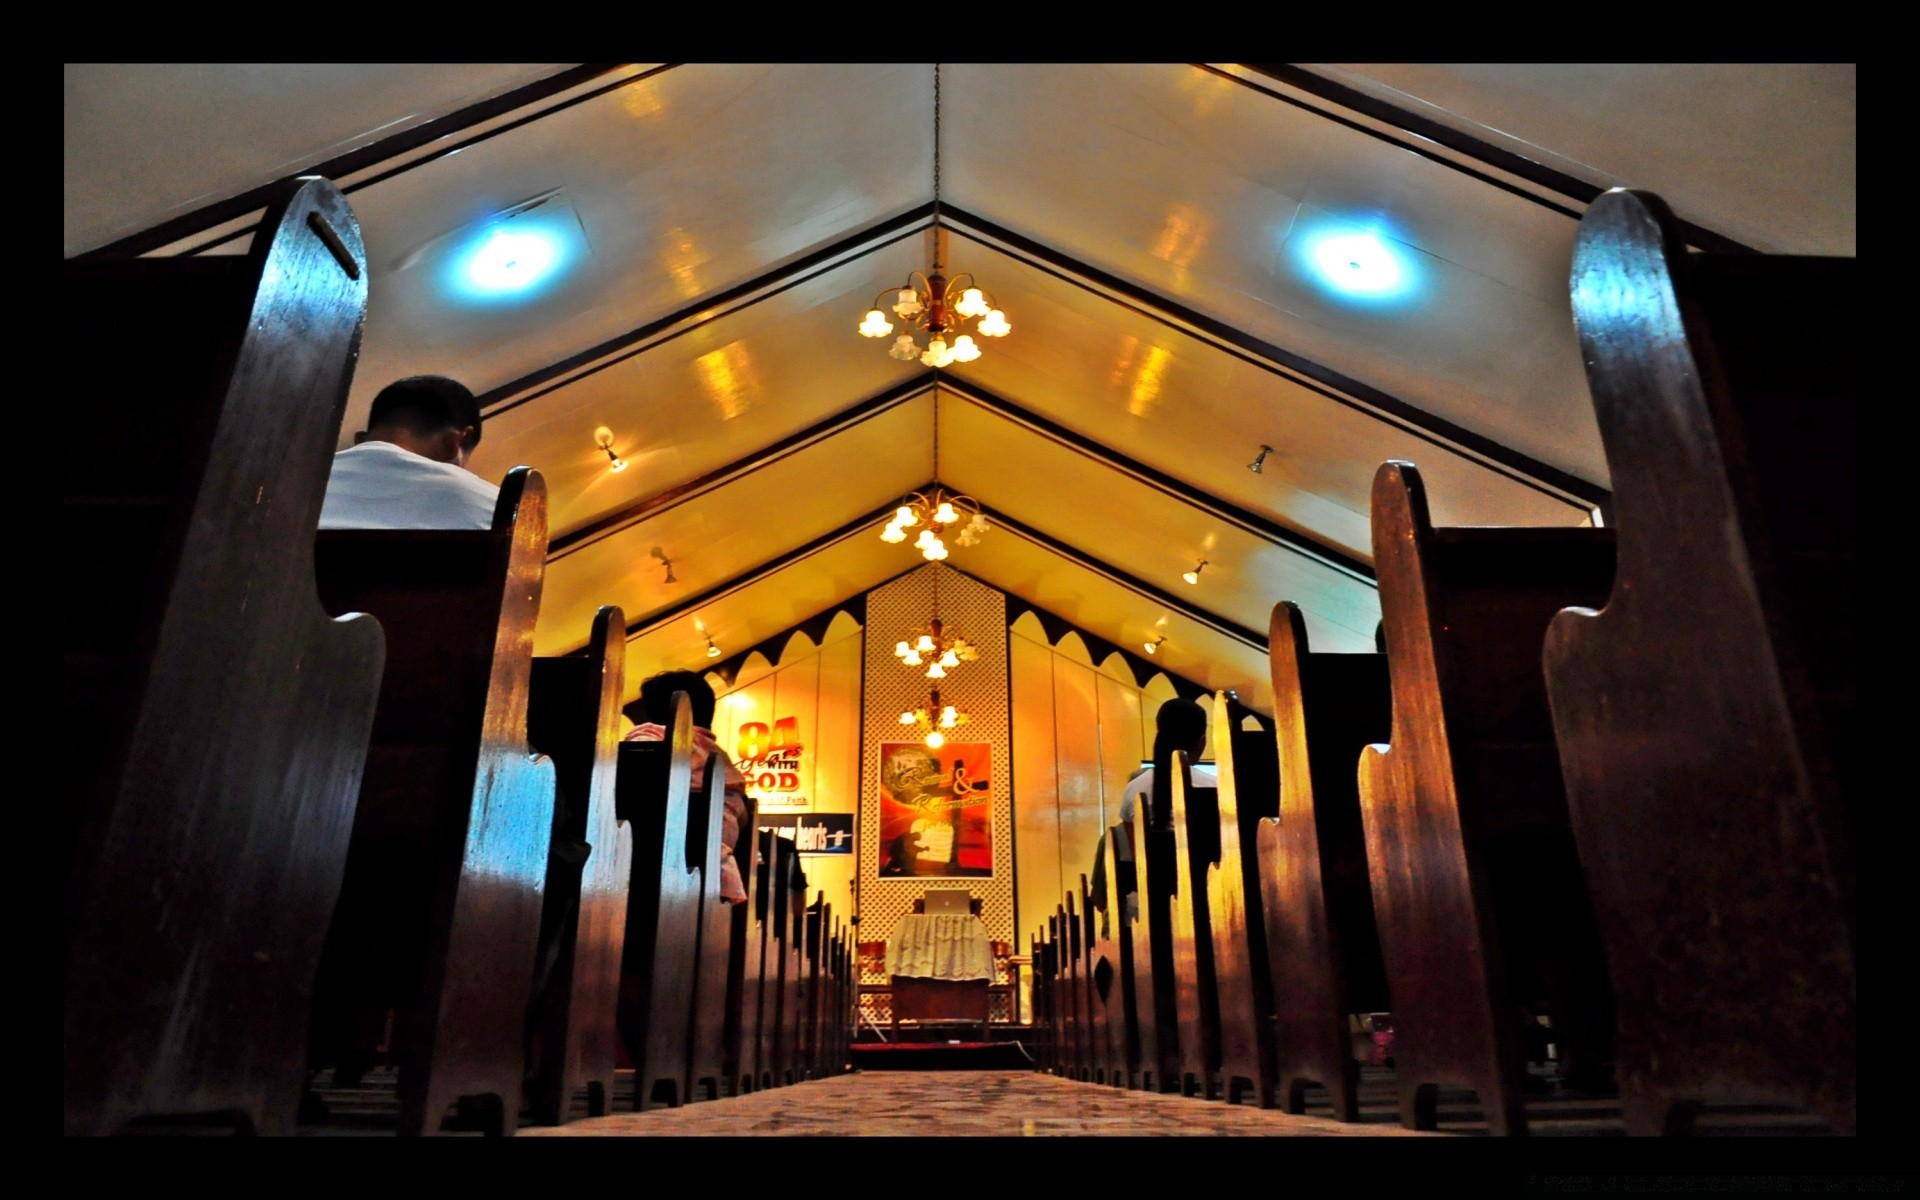 asia church architecture light indoors travel city building religion